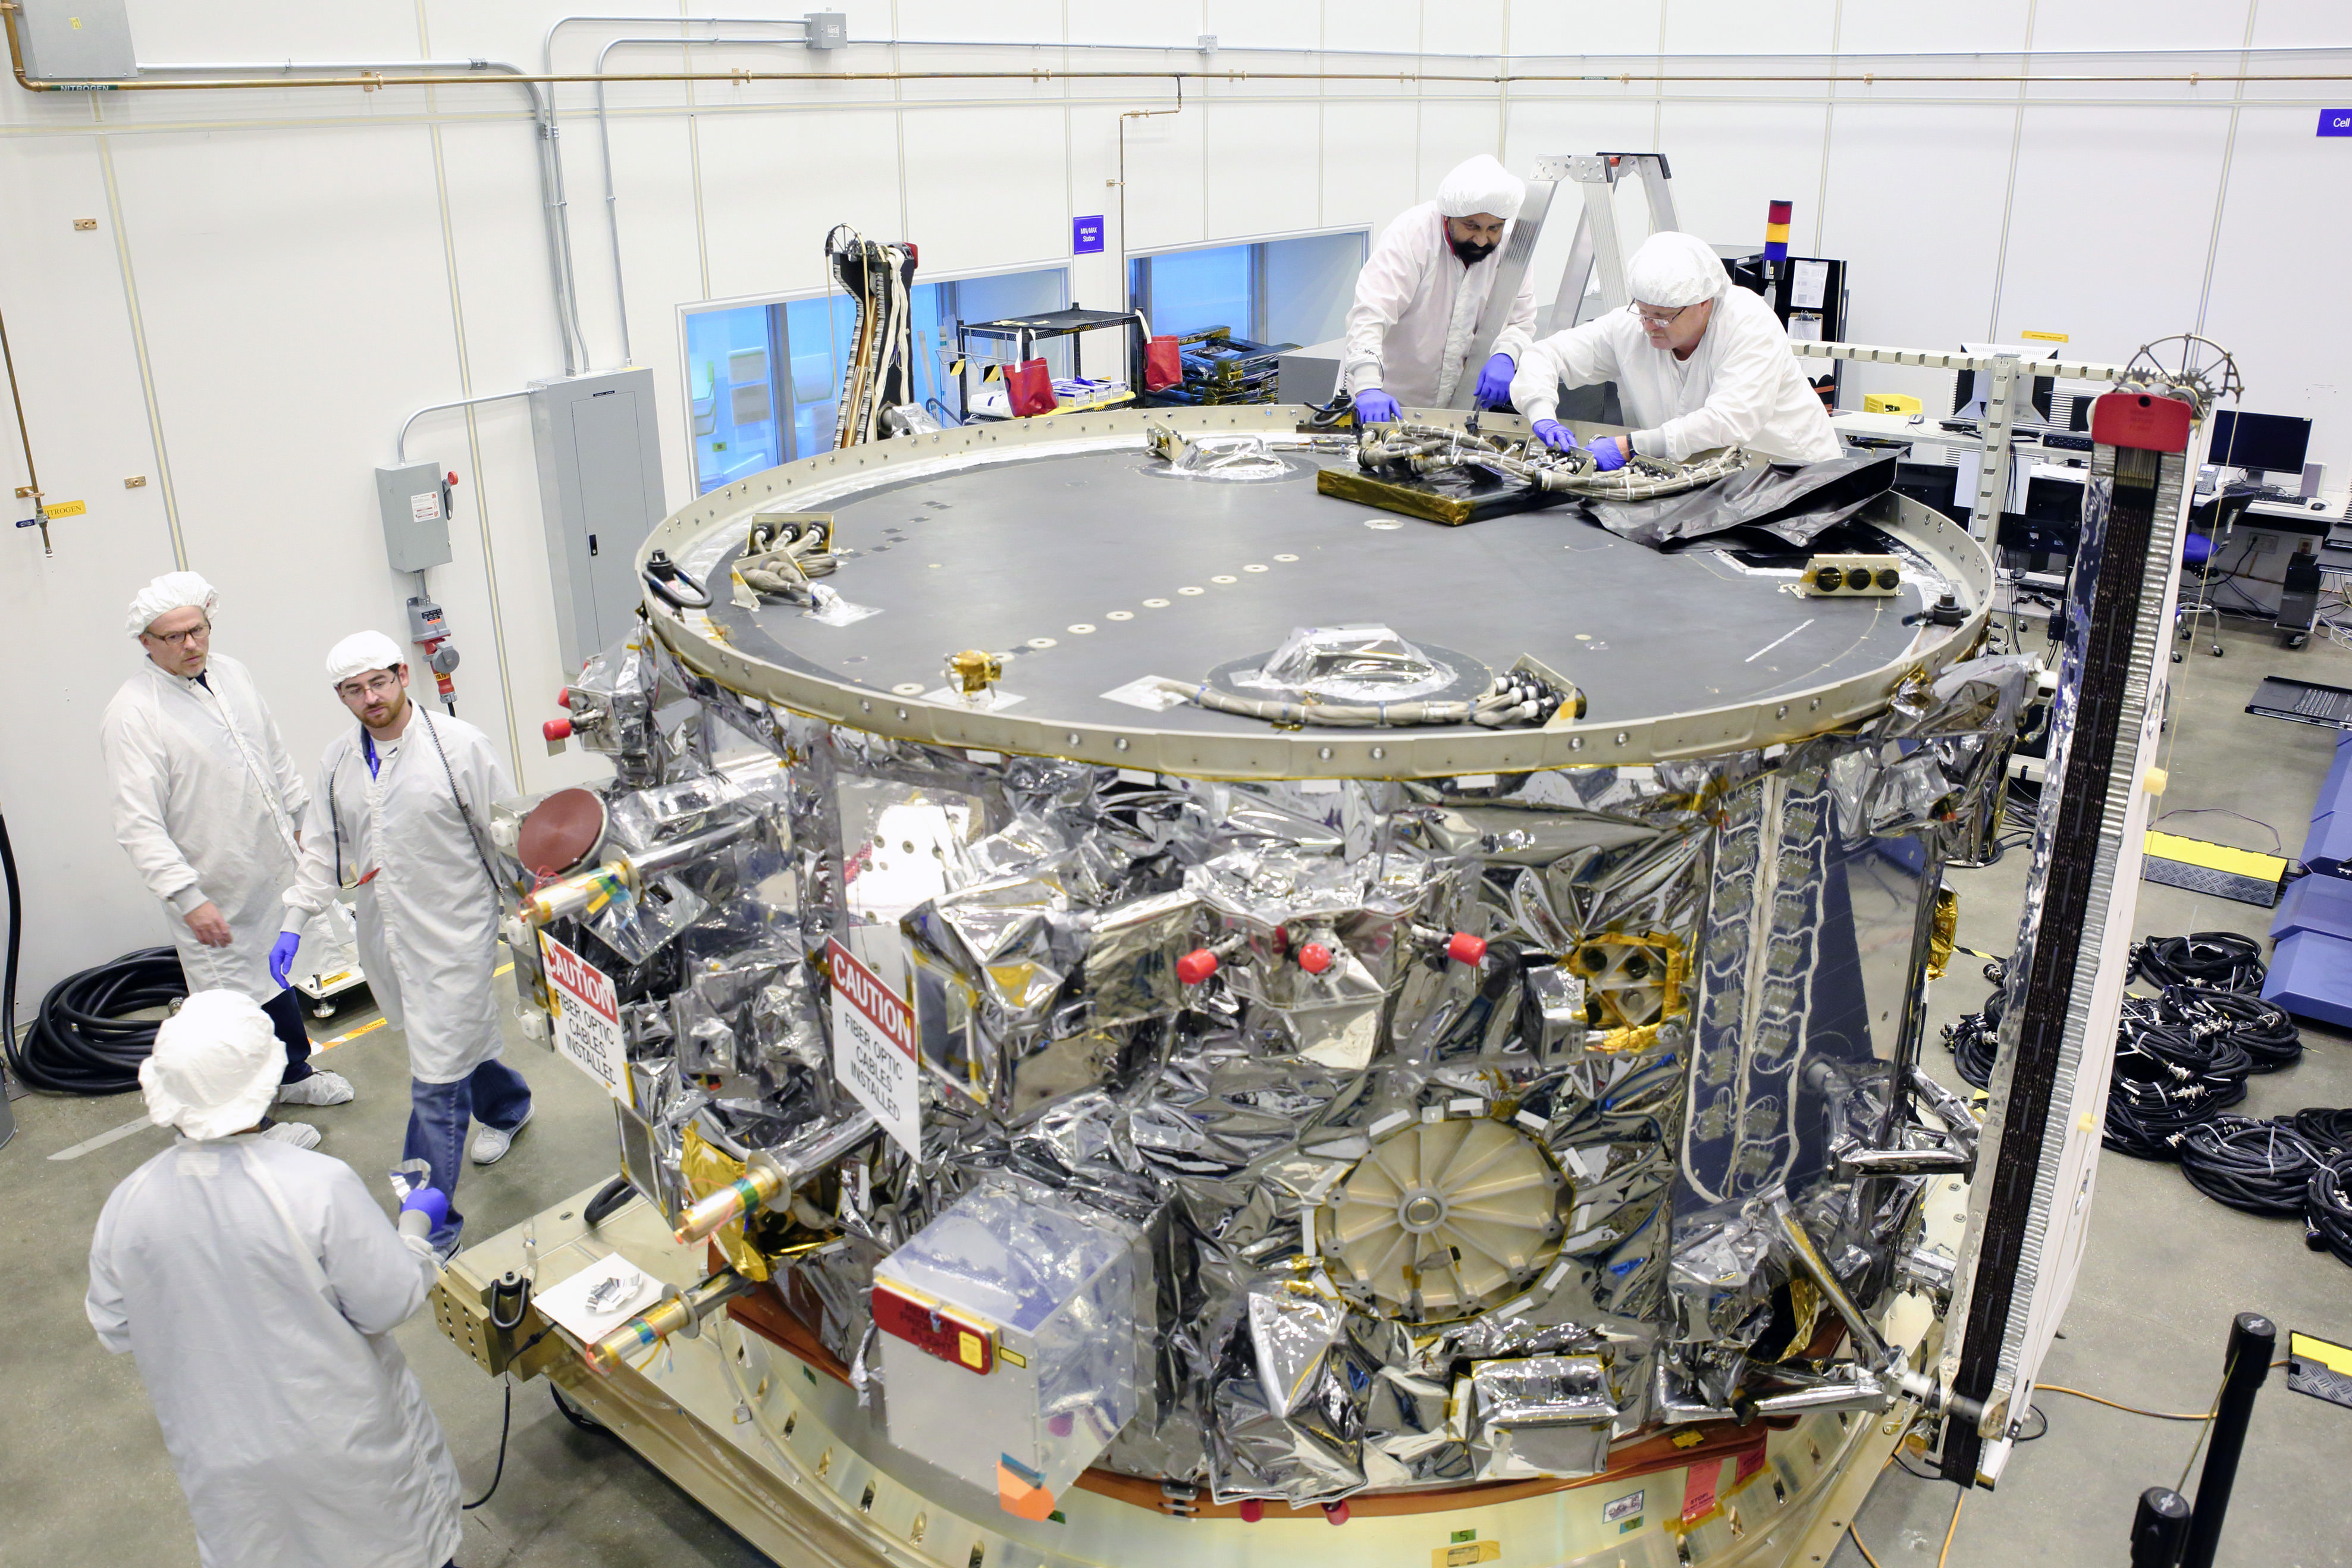 Orbital ATK OA-4 Cygnus service module assembled in the cleanroom in Dulles, Virginia has arrived at NASA’s Kennedy Space Center for integration with the pressurized module.   The OA-4 Cgynus spacecraft is slated to launch on resupply mission to the ISS on ULA Atlas V rocket on Dec. 3, 2015 from Cape Canaveral, Florida.    Credit: Orbital ATK 